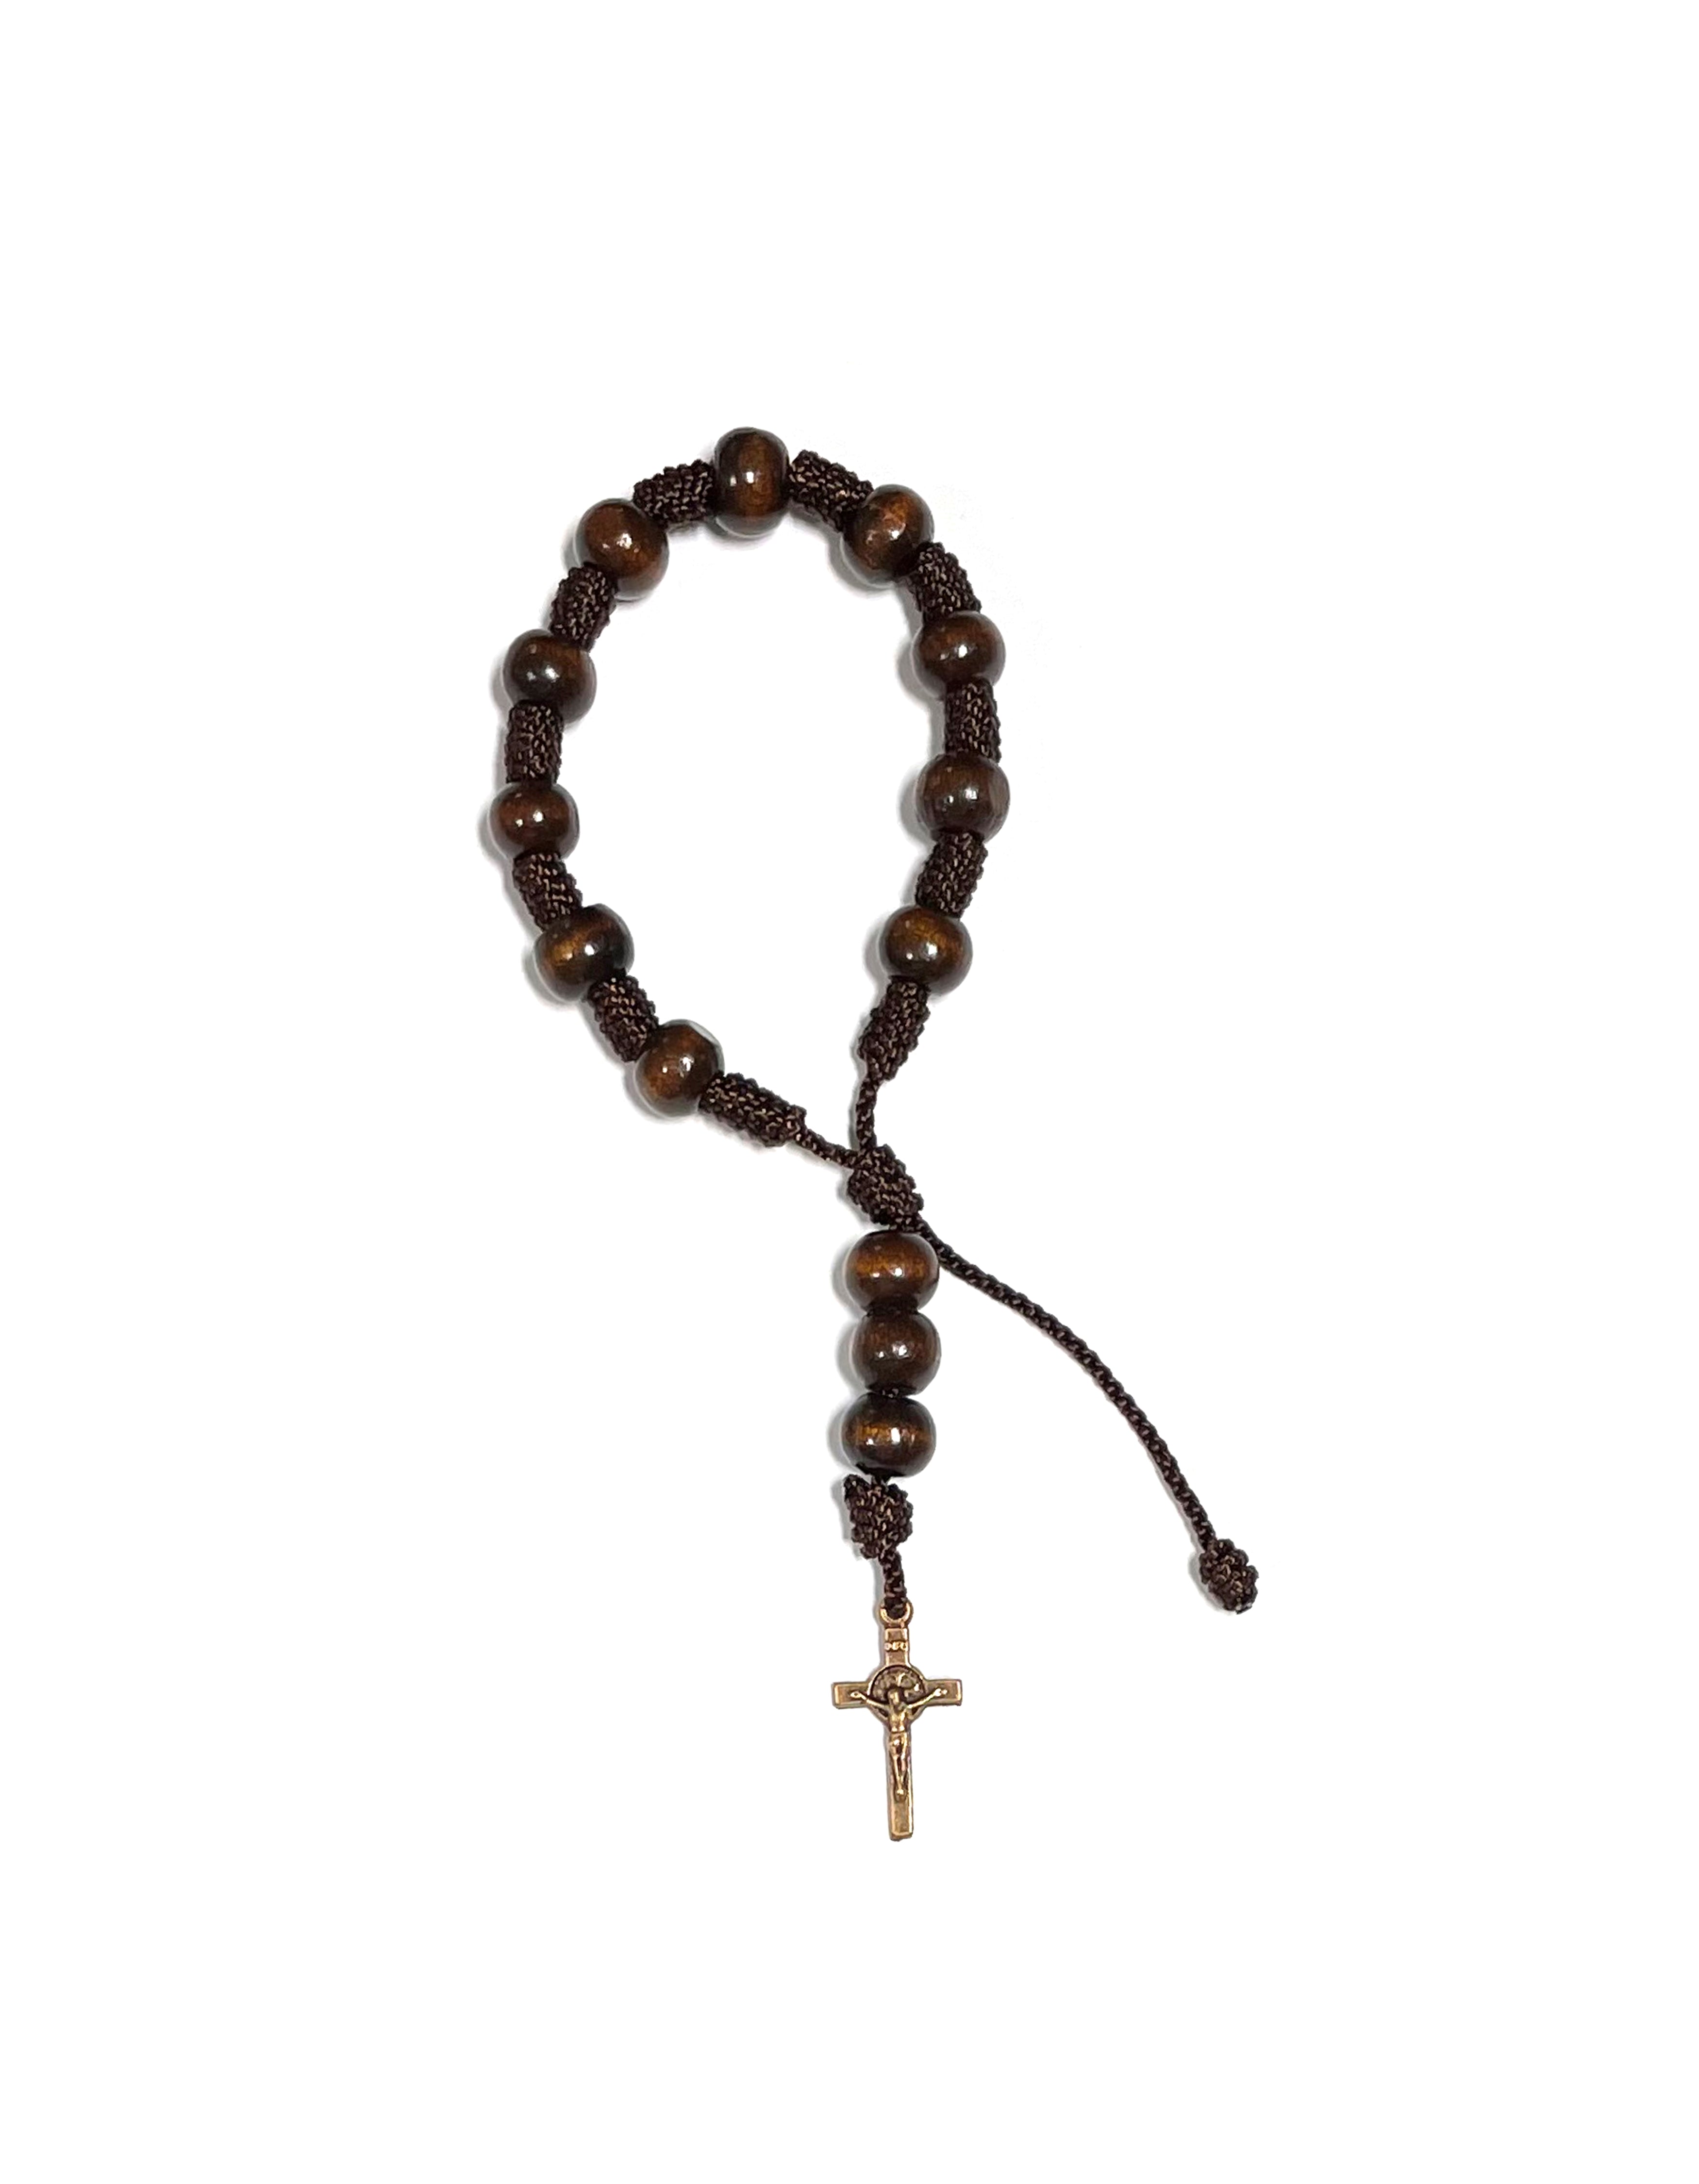 Decade bracelet with small cross of Saint Benedict made with wooden beads and adjustable cord